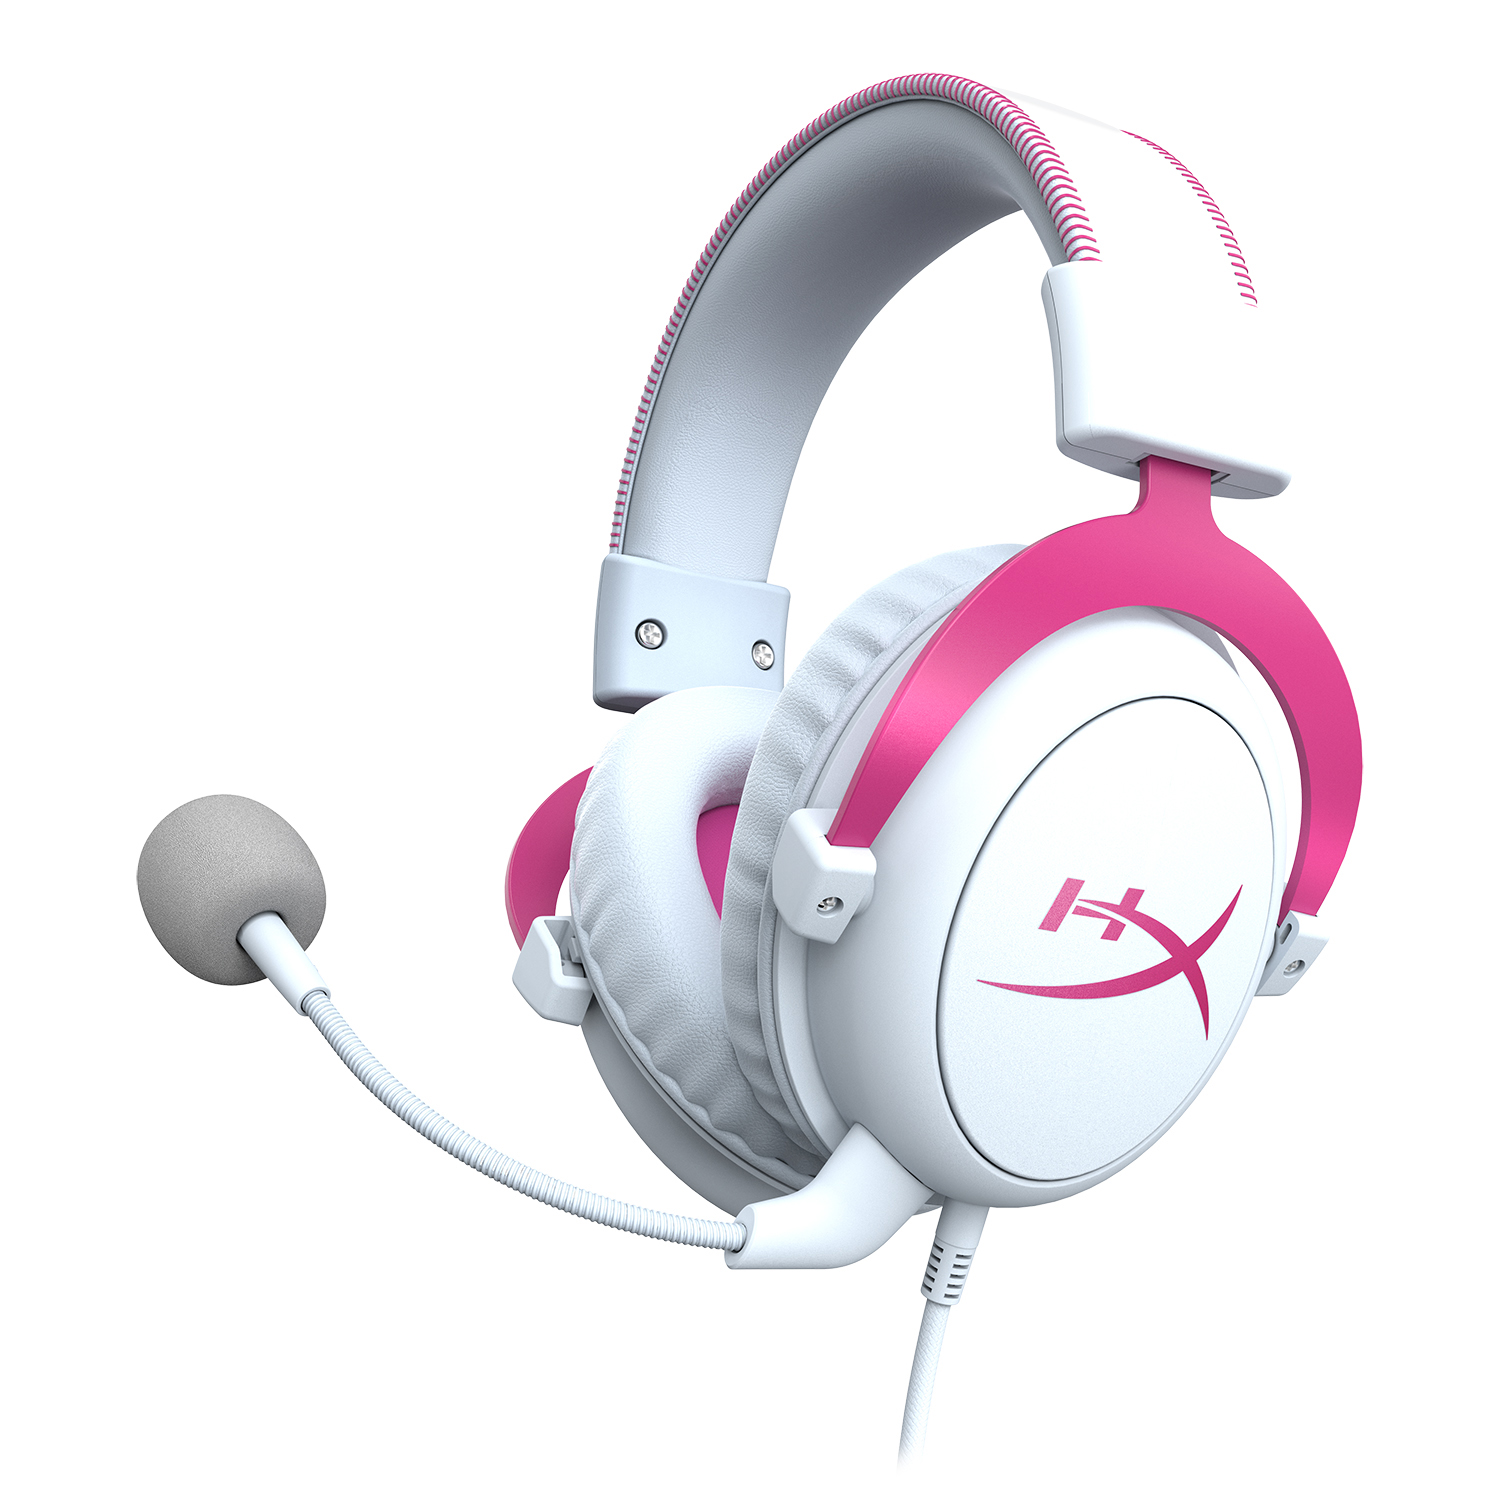 HyperX Cloud II Gaming Headset: New colourful headset introduced